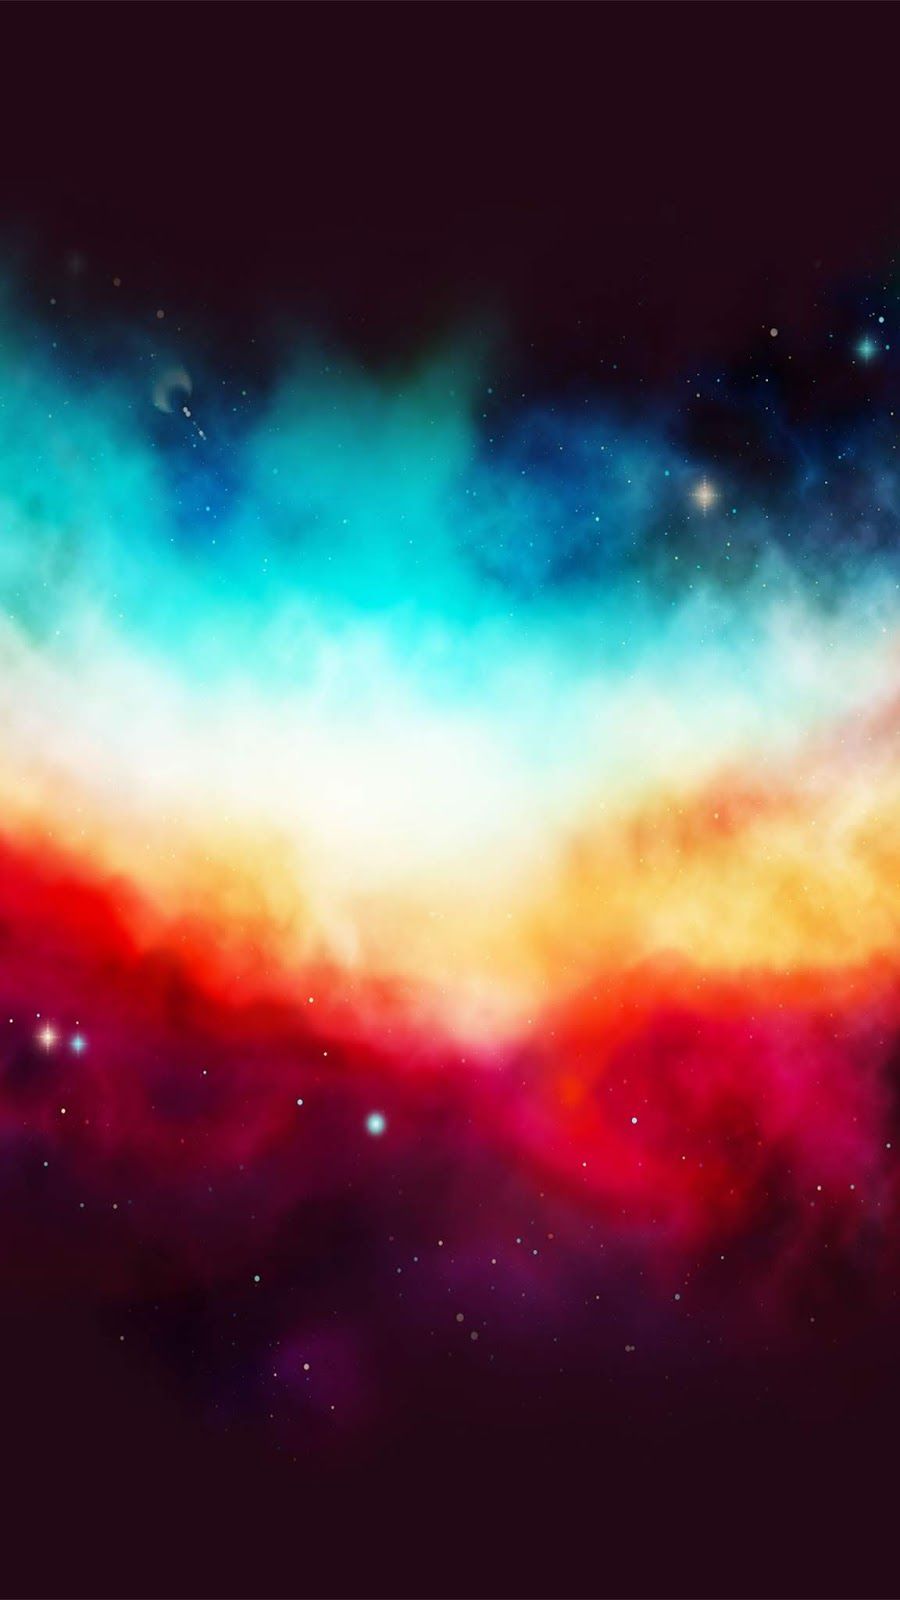 Rainbow space #wallpaper #iphone #android #background #followme. Cellphone wallpaper background, Cellphone wallpaper, Photography wallpaper